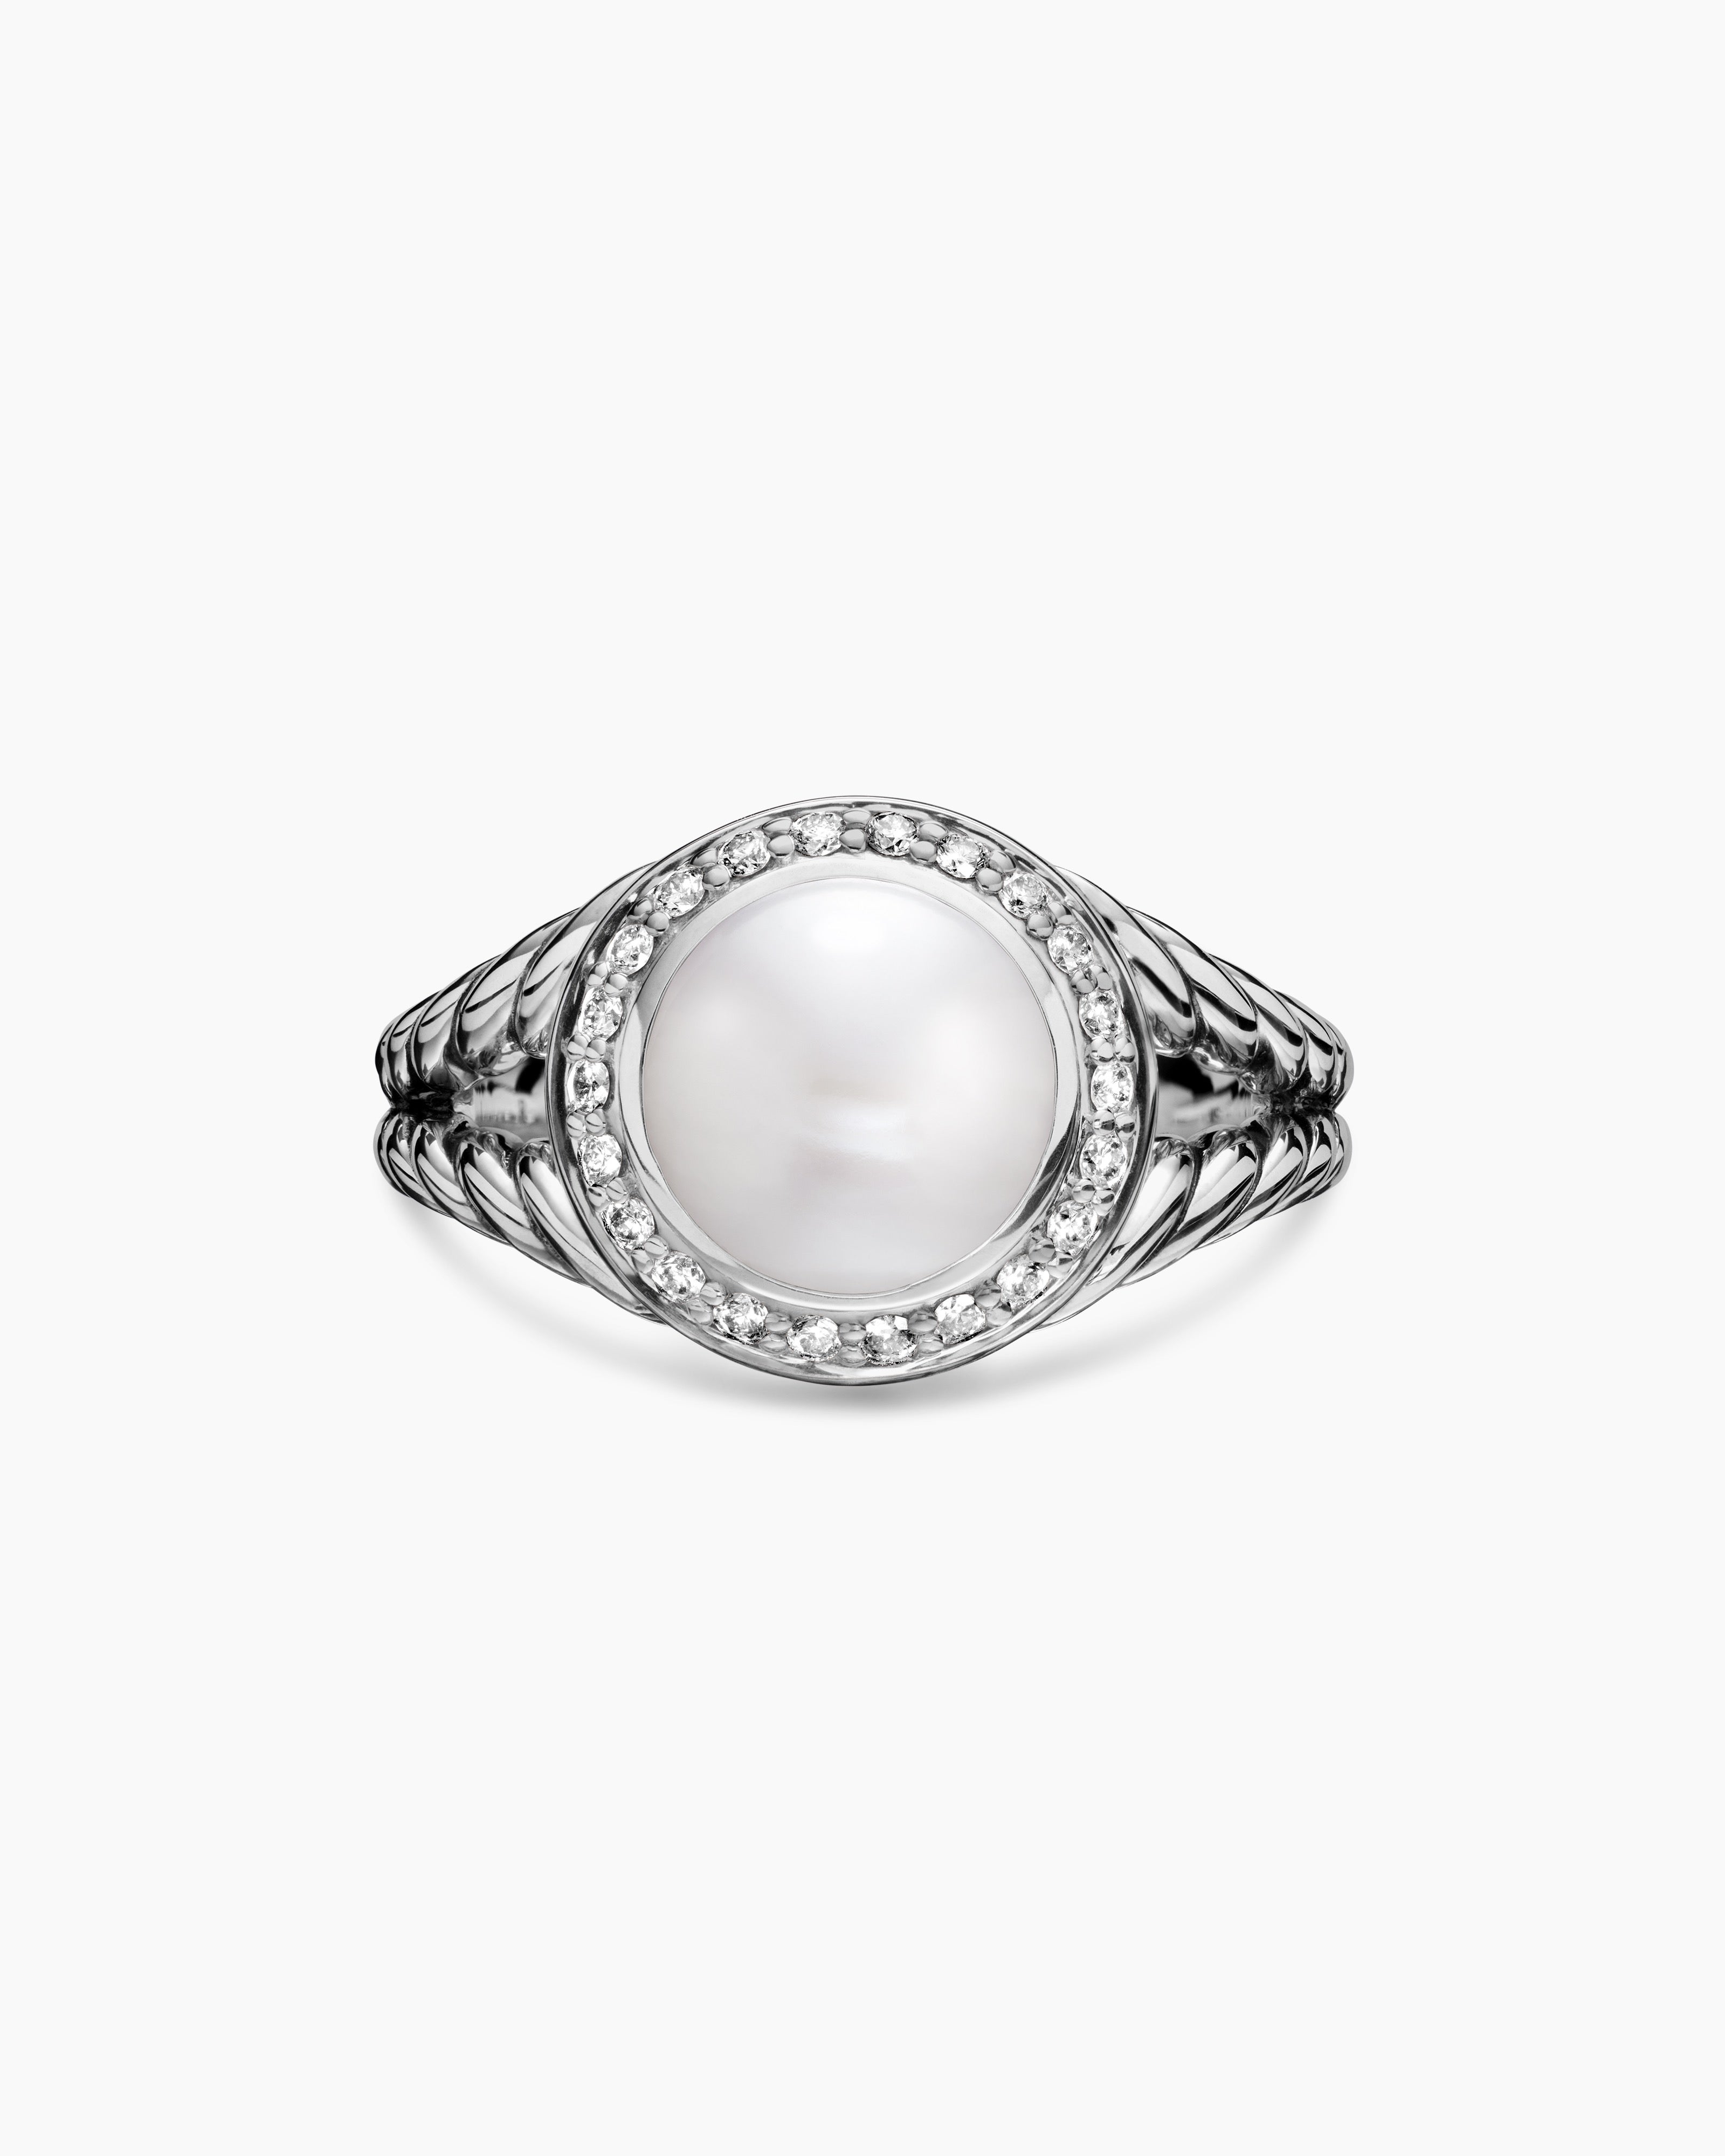 Ring - Women's Large Glittery Cubic Zirconia White Pearl Ring - Spiraling  Design Sterling Silver Statement Ring – Blingschlingers Jewelry